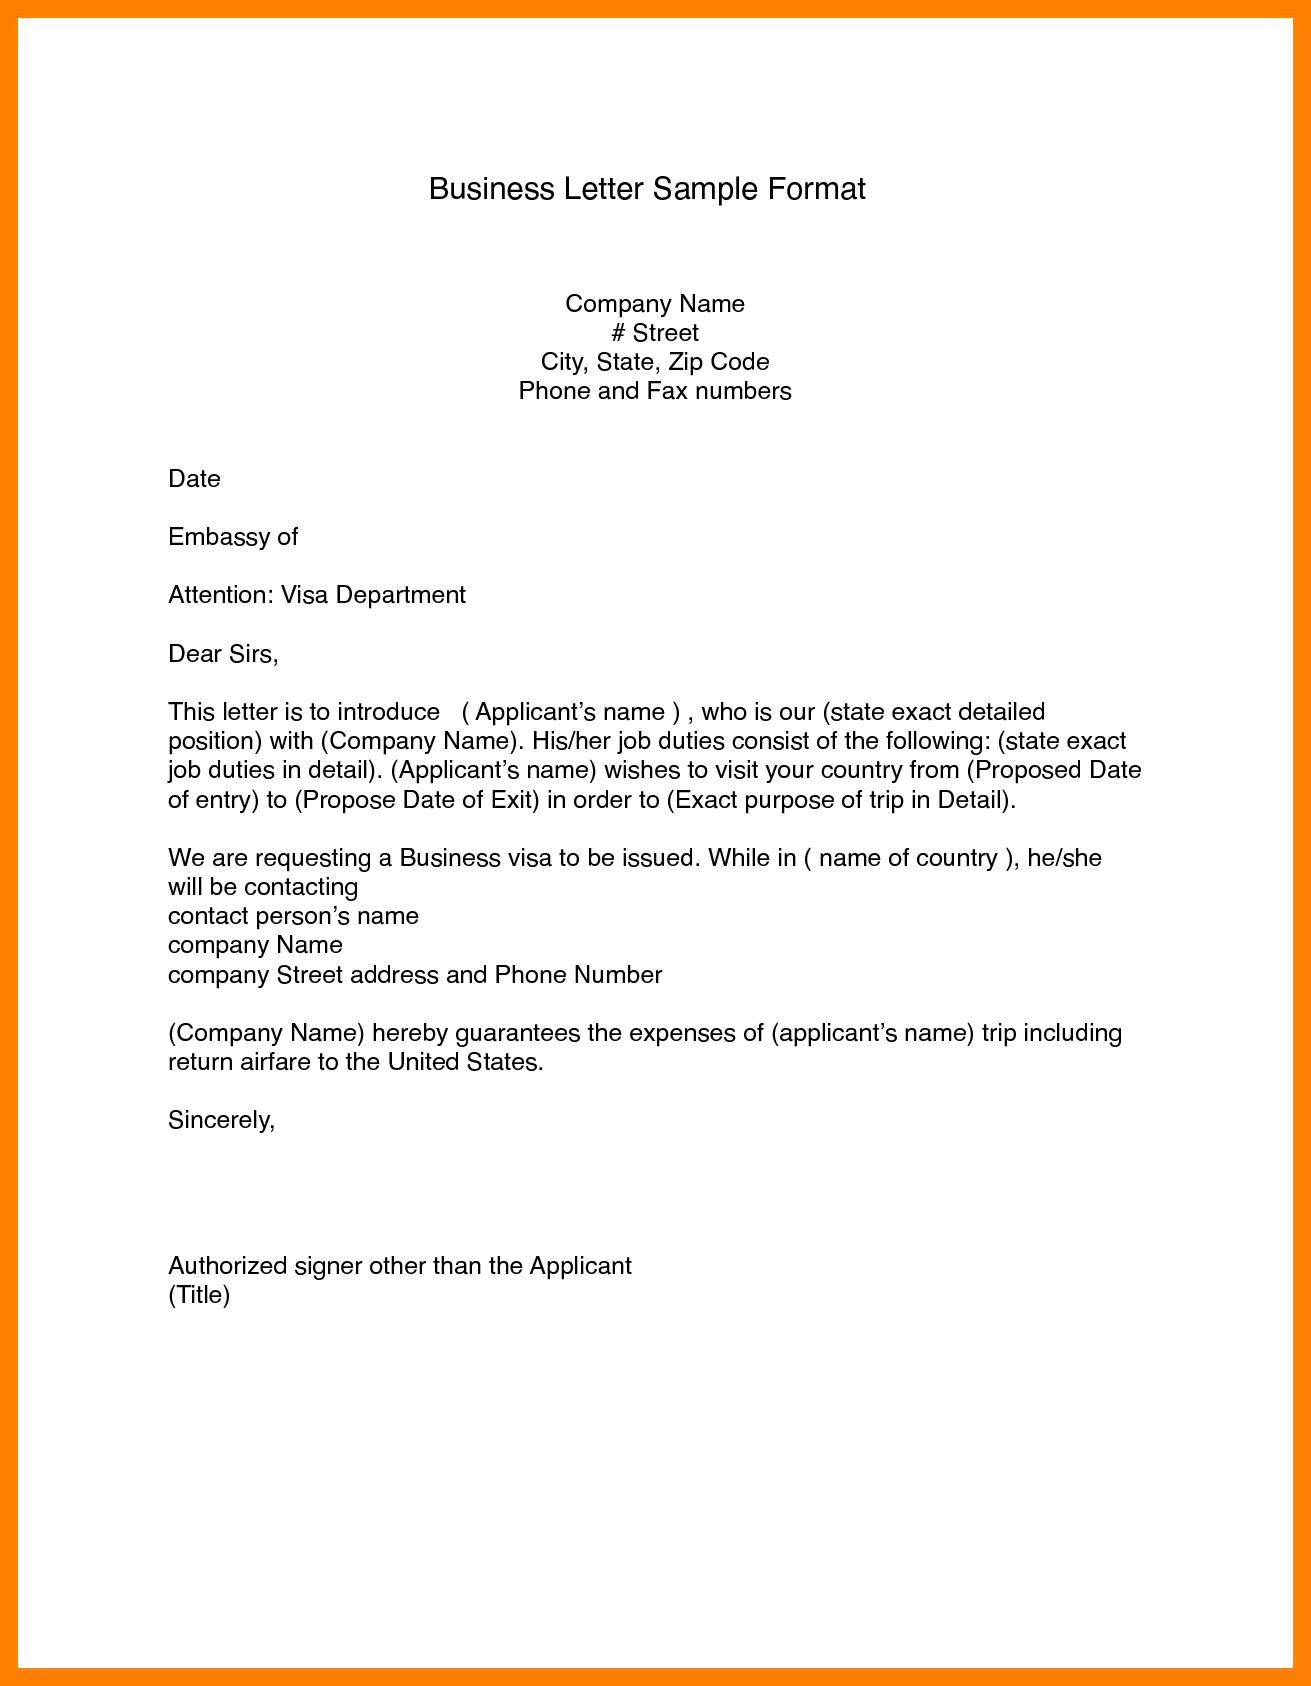 Letter format business email template sample example simple 